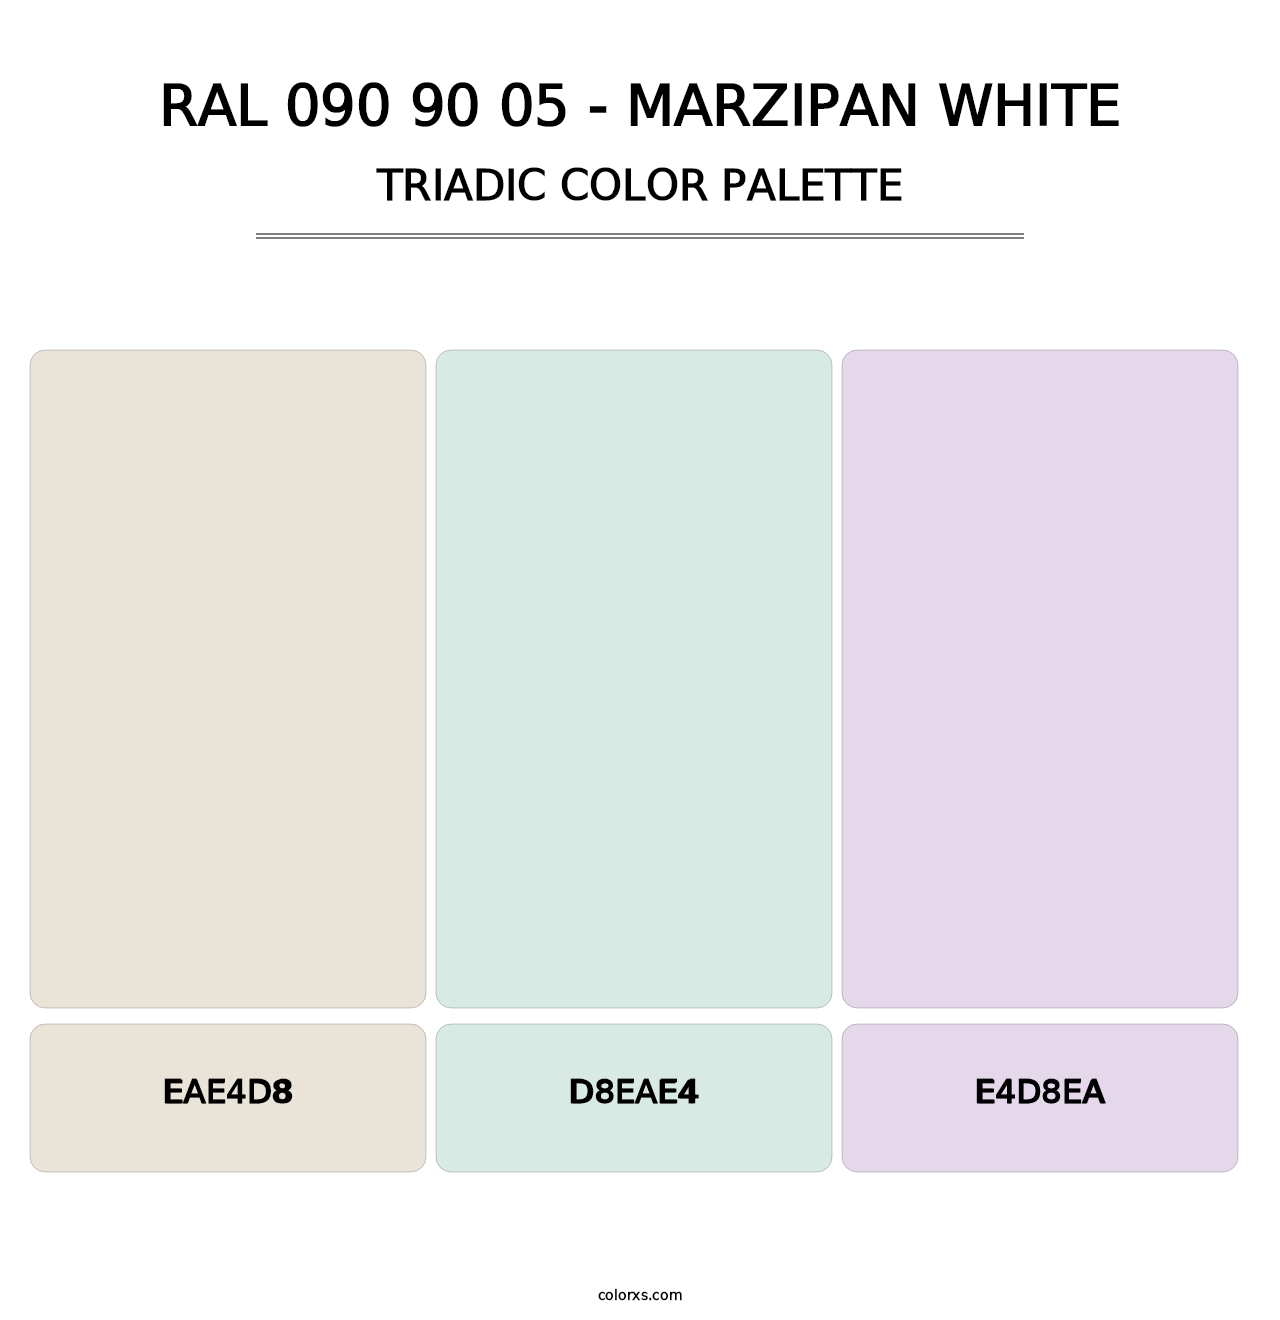 RAL 090 90 05 - Marzipan White - Triadic Color Palette